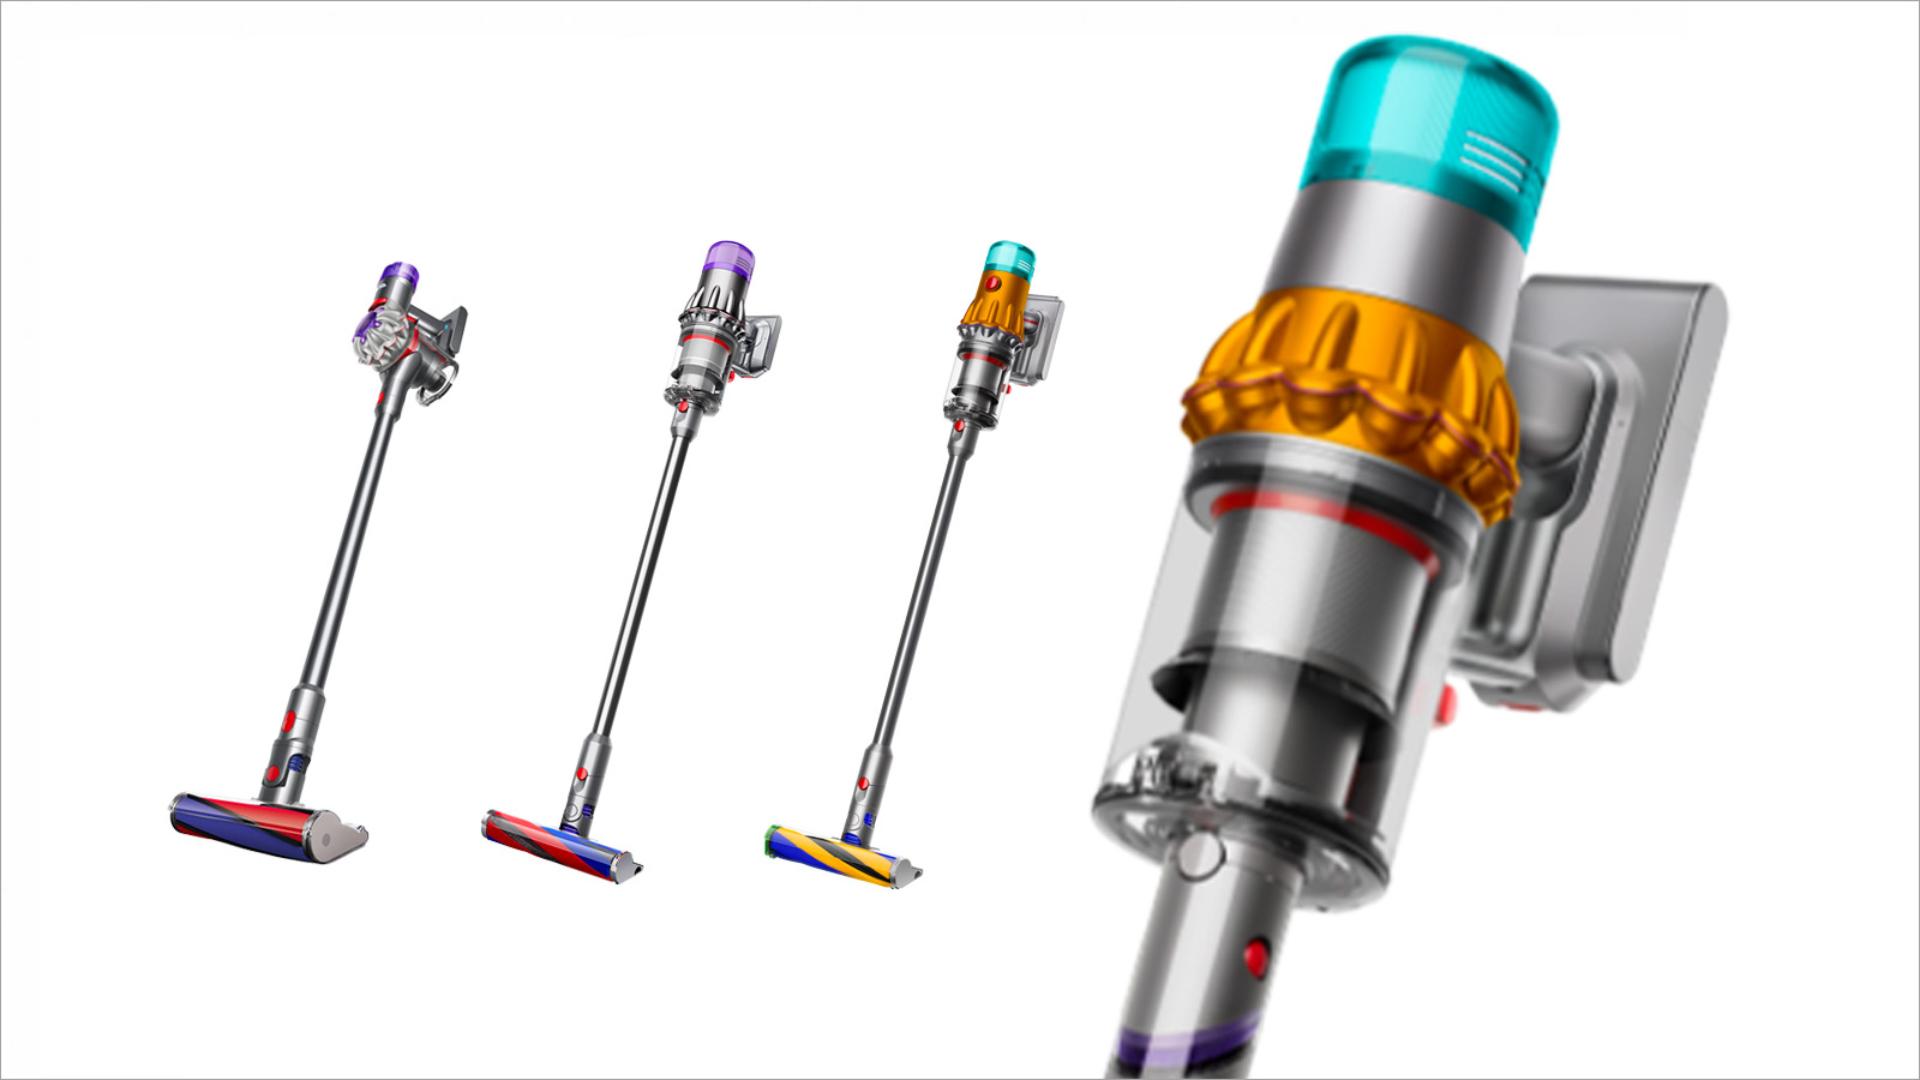 Accessories for Dyson vacuums